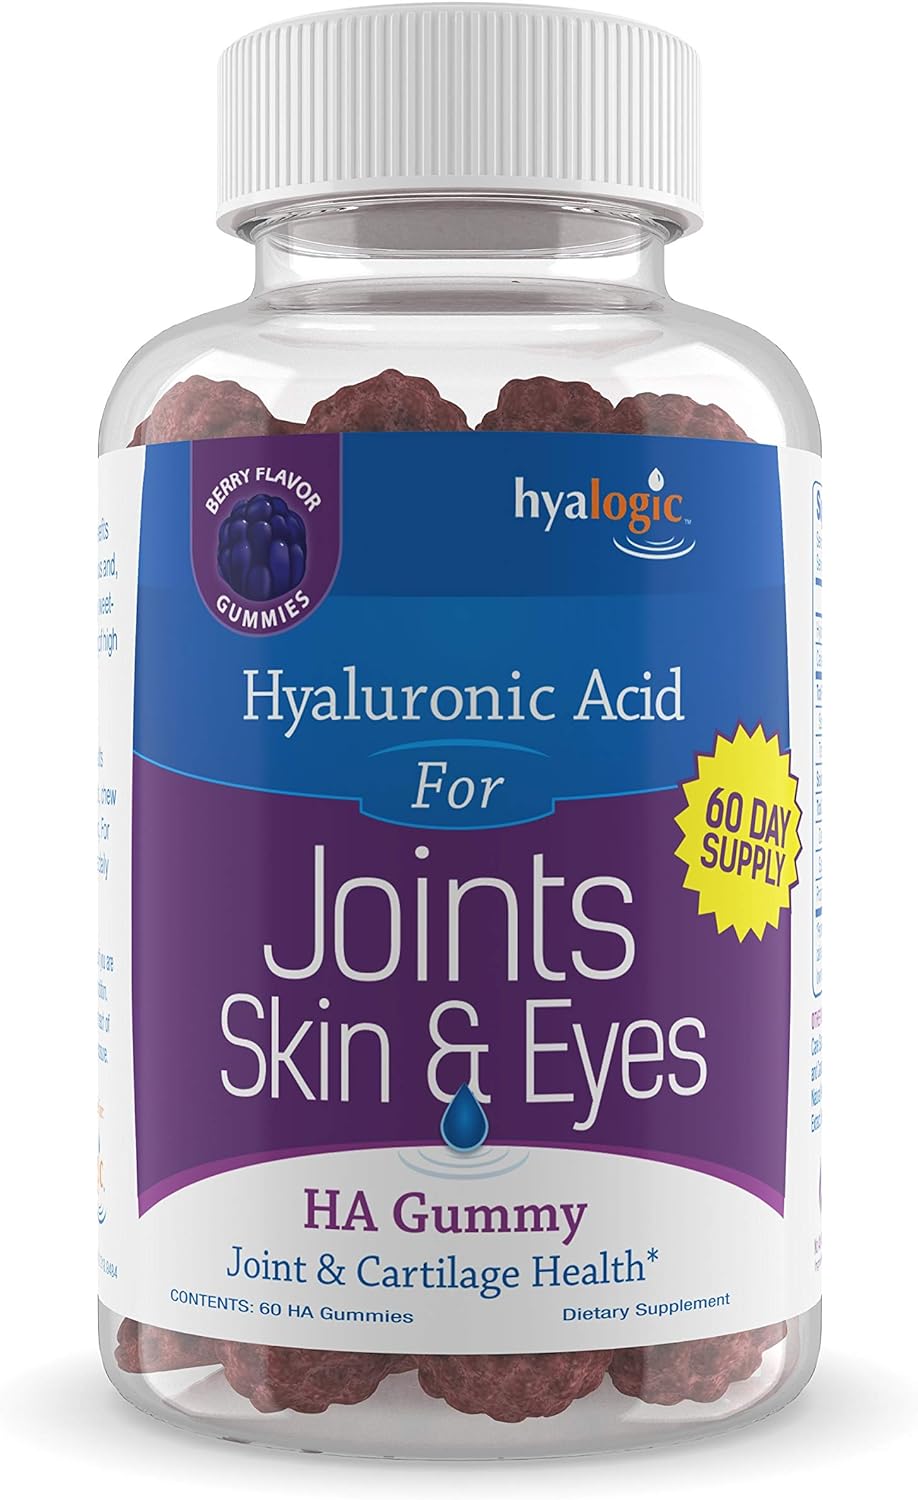 Hyalogic Chewy HA Gummies Mixed Berry Flavor Hyaluronic Acid Gummies ? Gluten-Free Gummy Vitamins for Adults - HA Supplement for Joints, Skin & Eyes ?60 Count (120 mg)